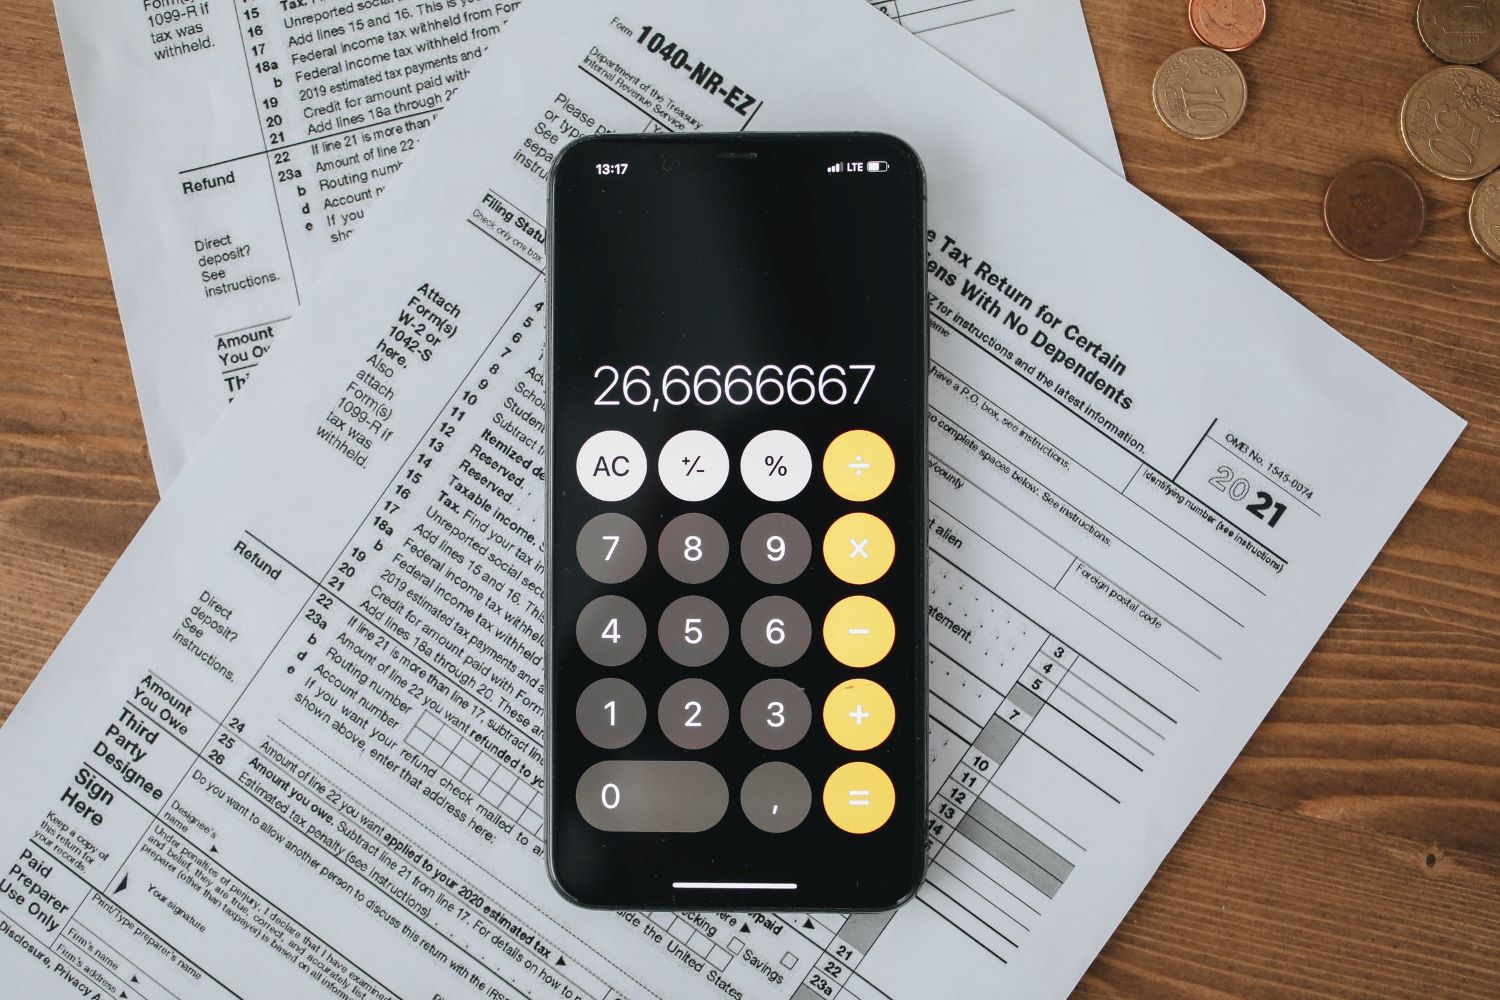 Tax forms with calculator on wooden surface